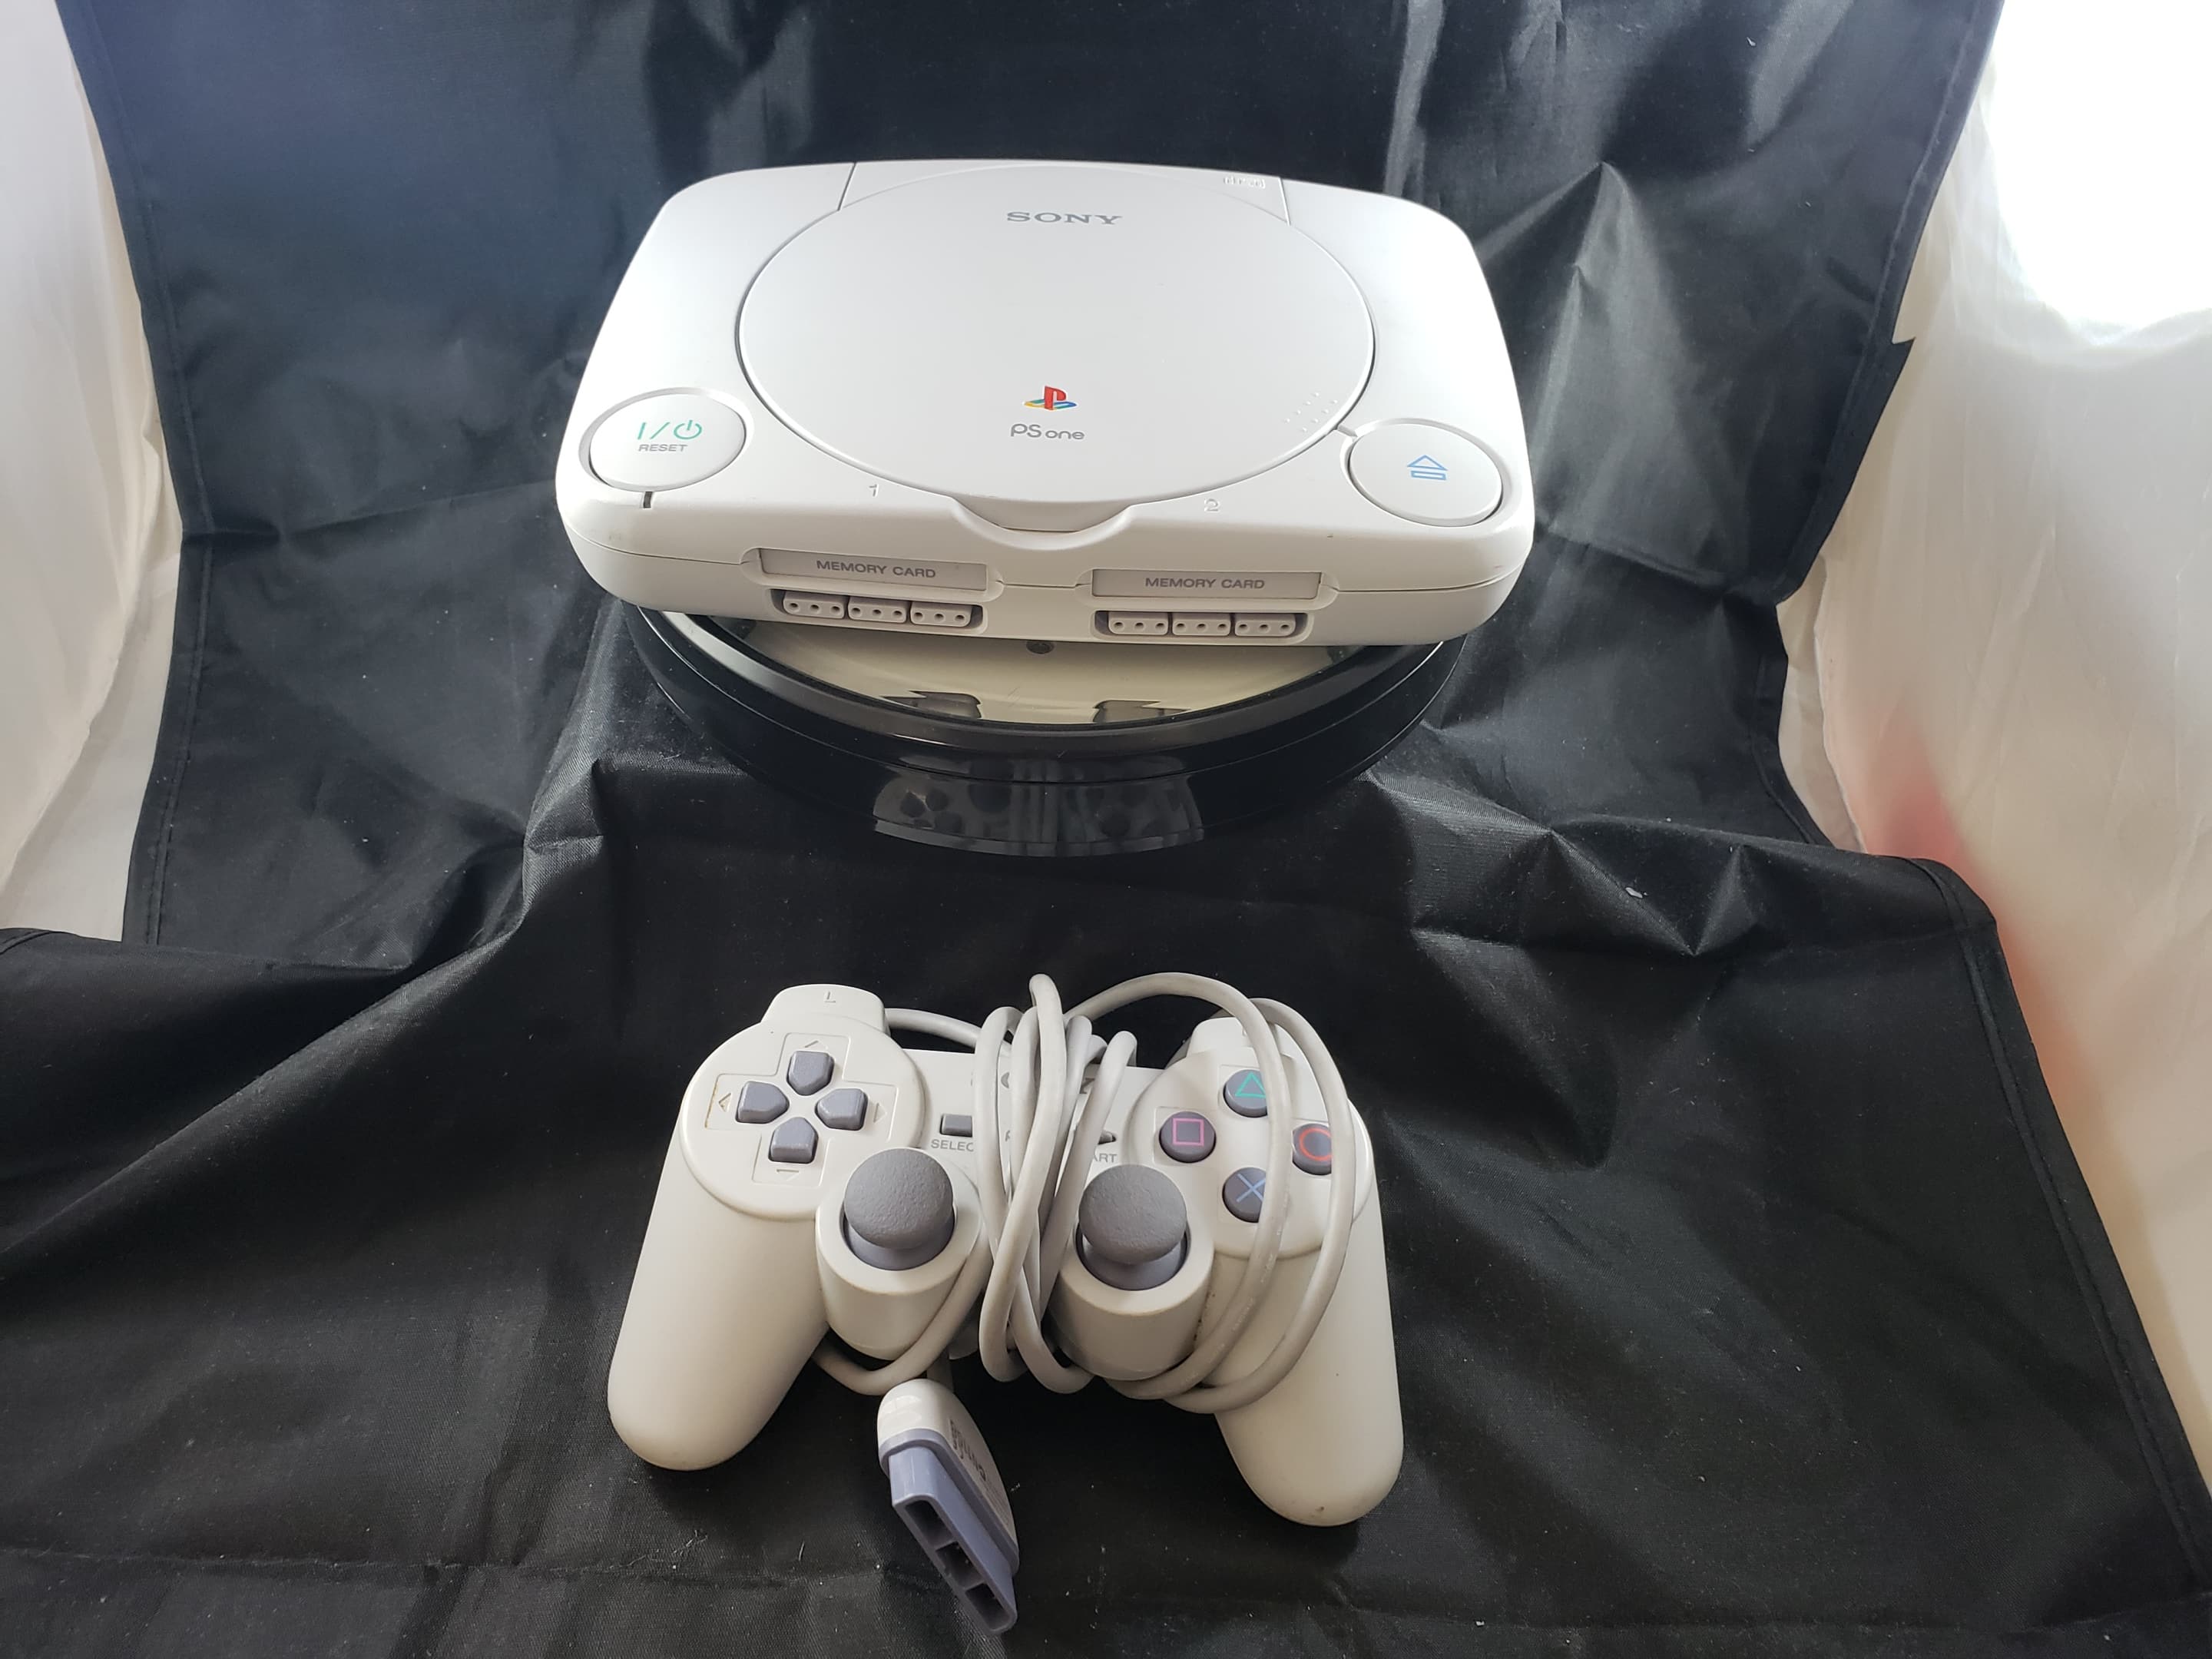 Sony PlayStation 1 Video Game Console for sale online